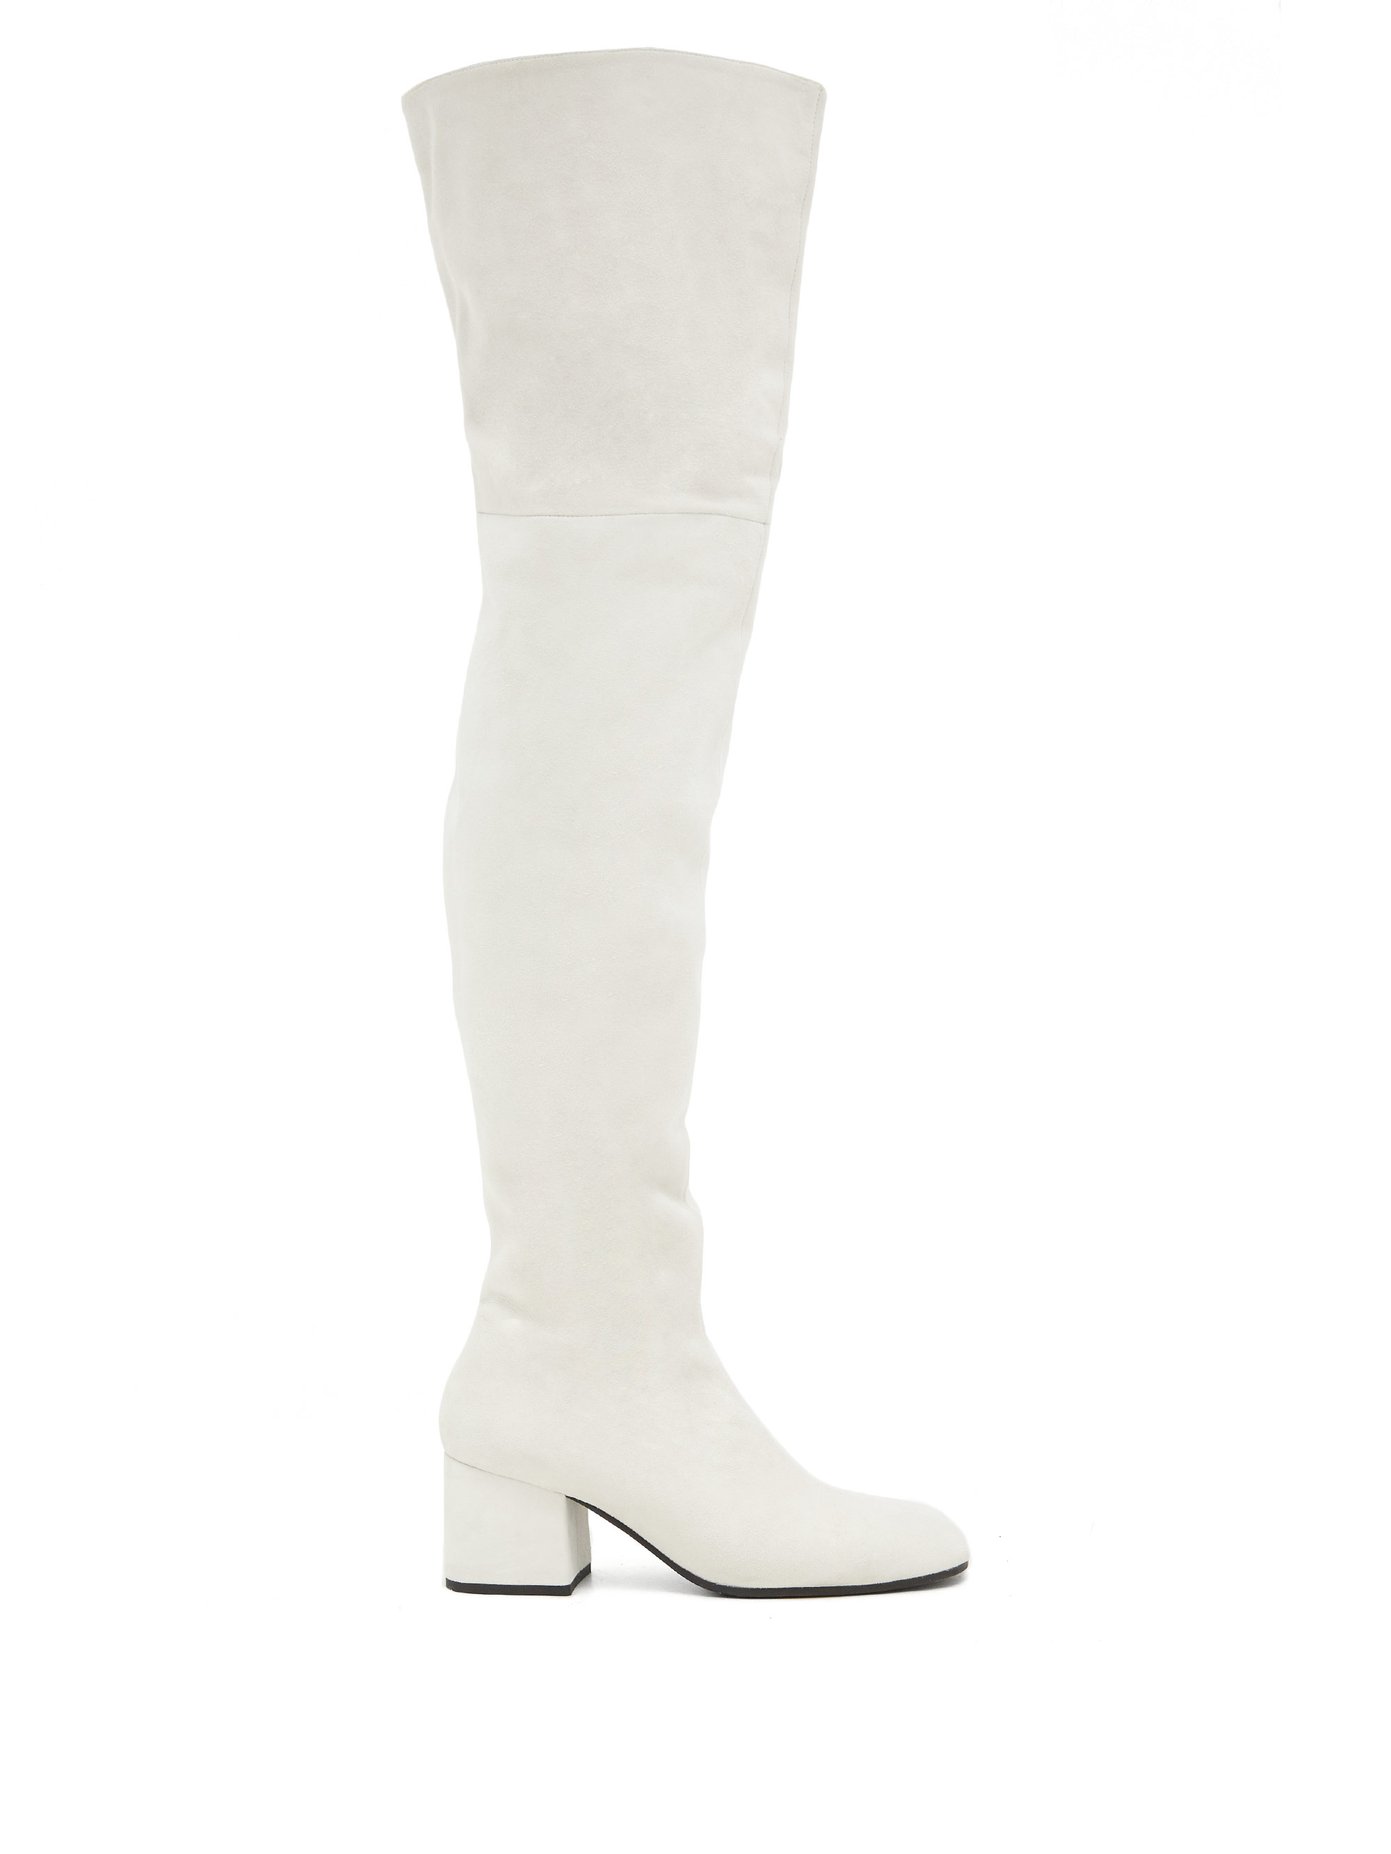 grey suede over the knee boots uk